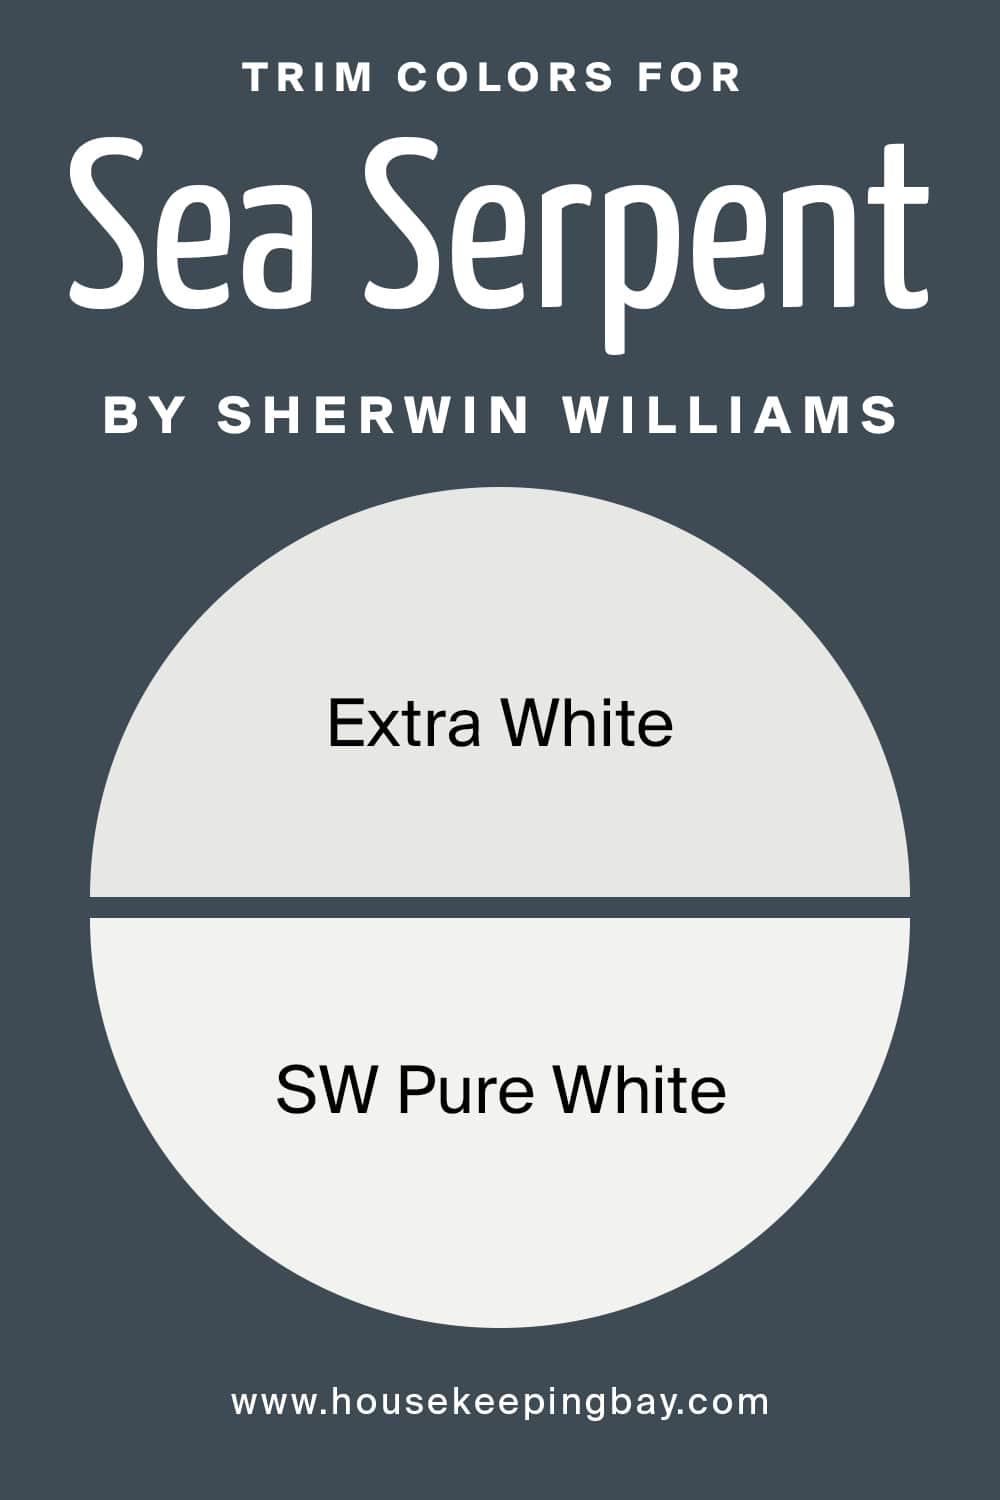 Trim Colors for Sea Serpent by Sherwin Williams